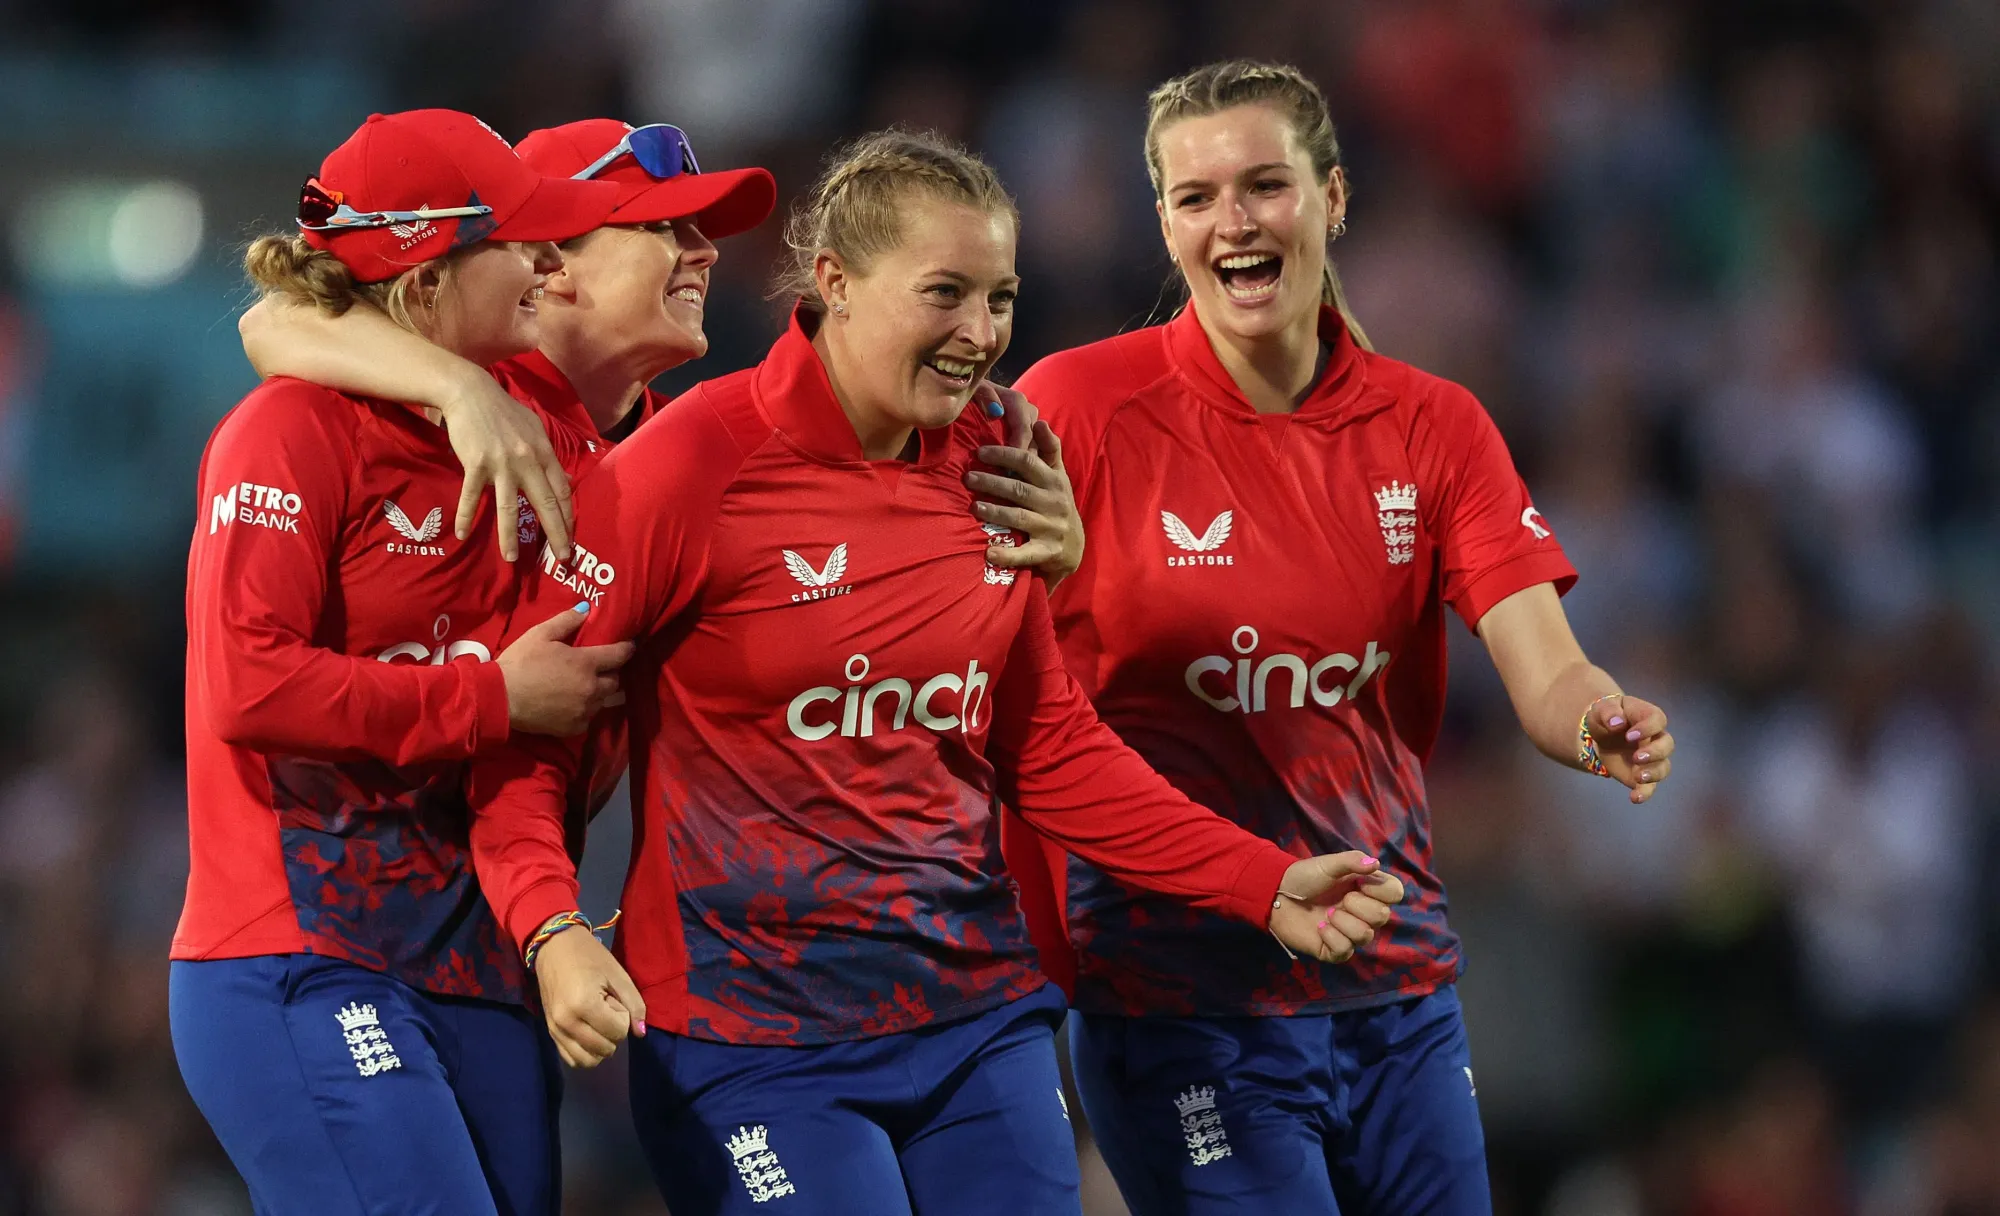 The England Women's cricket team is using AI to gain competitive advantage